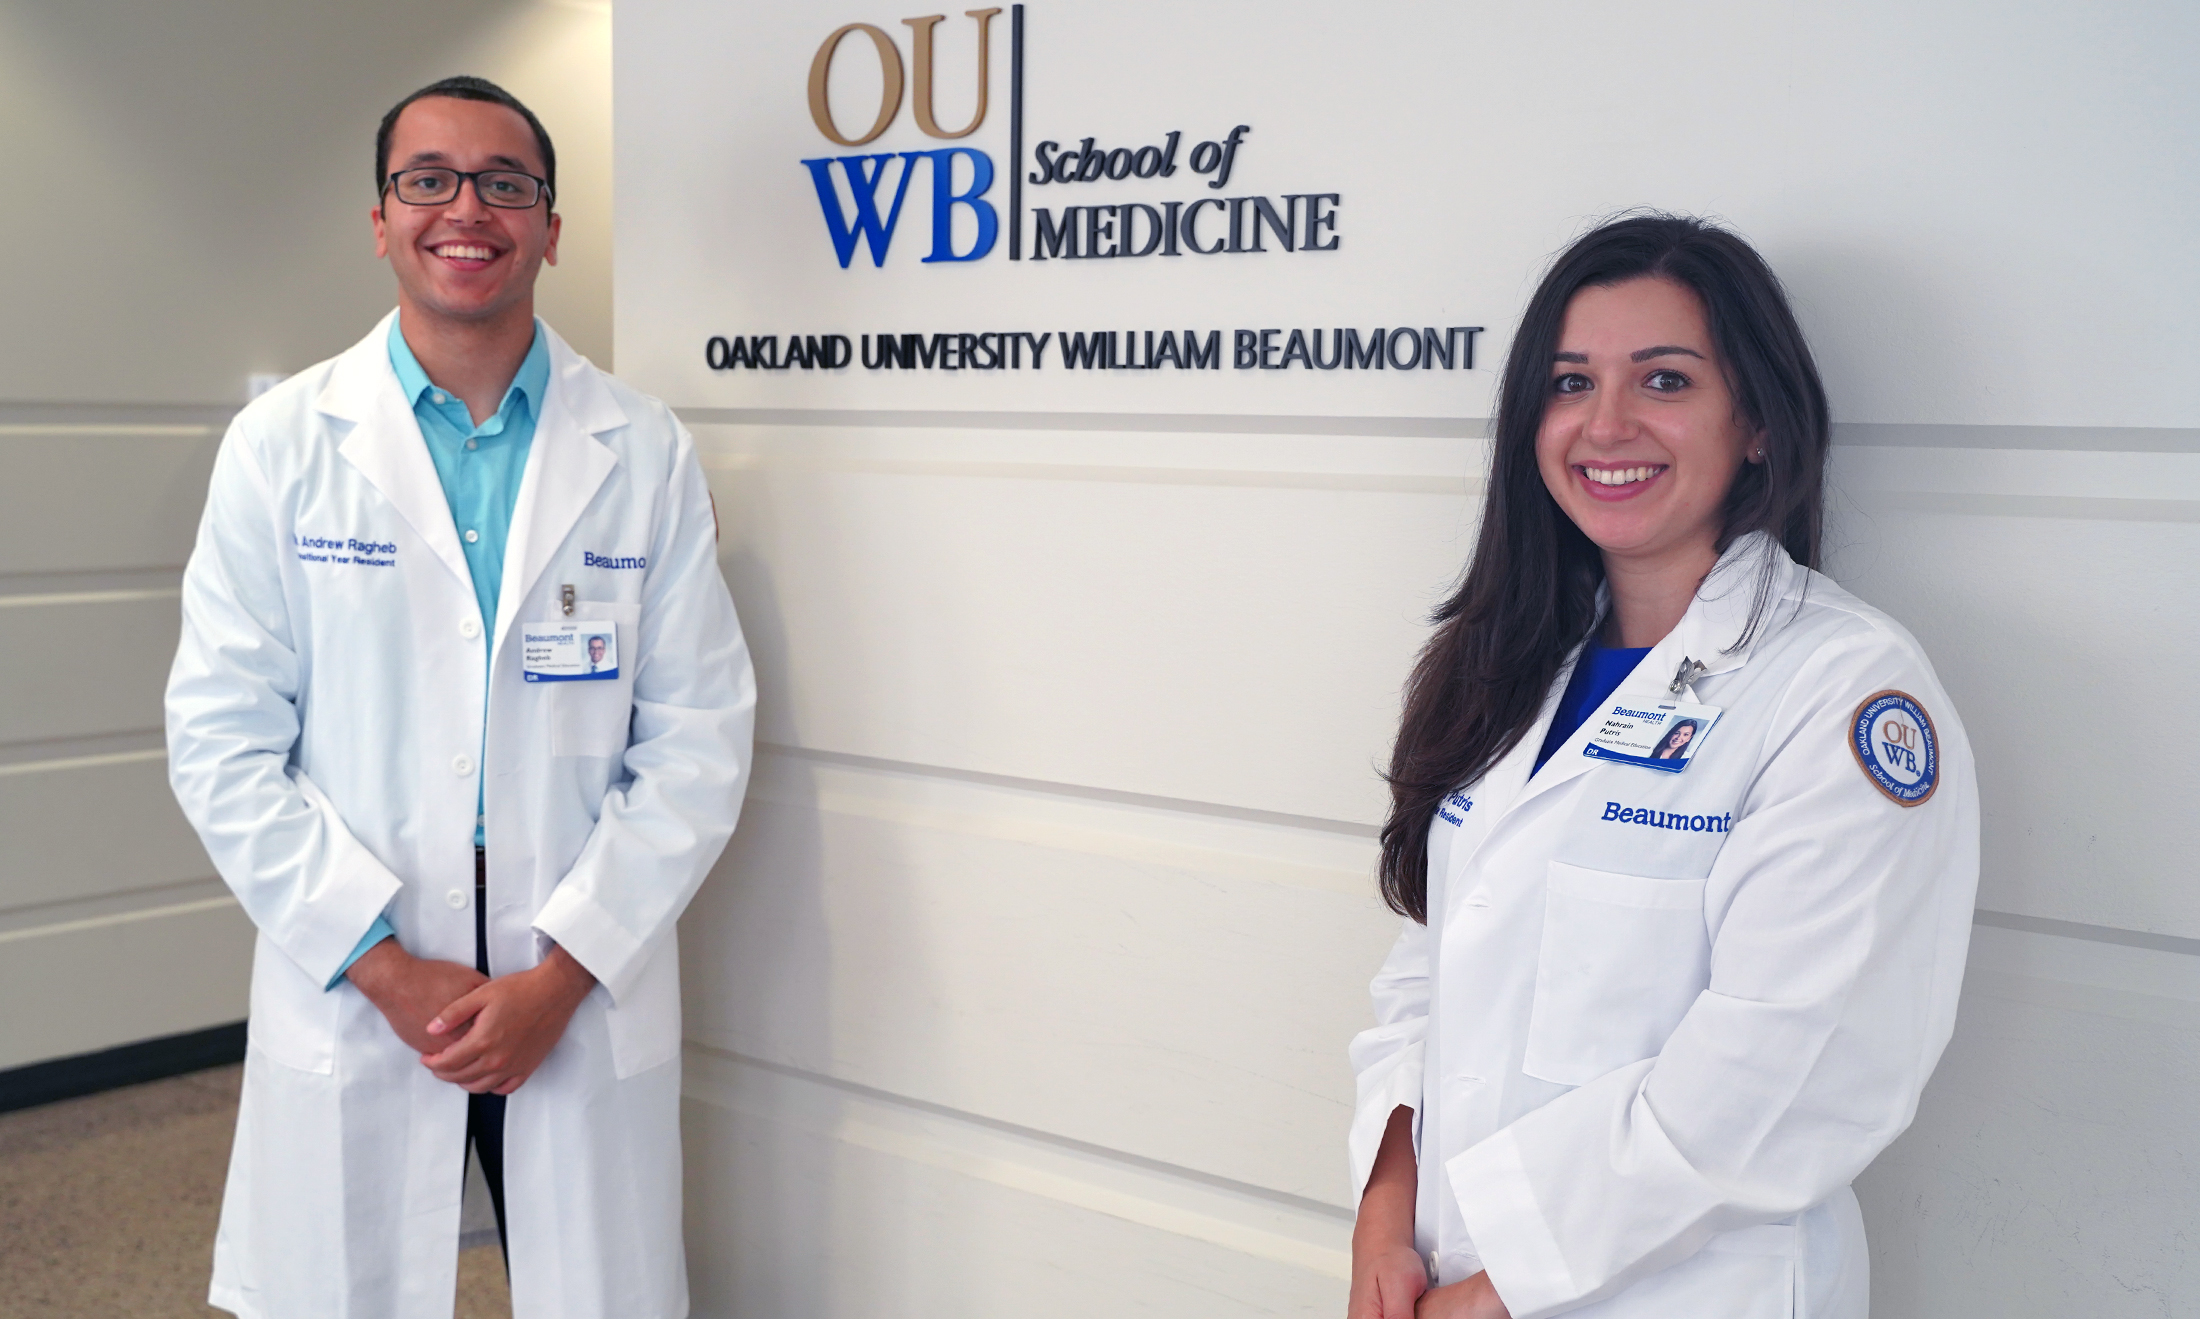 An image of OUWB alumni posing in front of an OUWB sign.